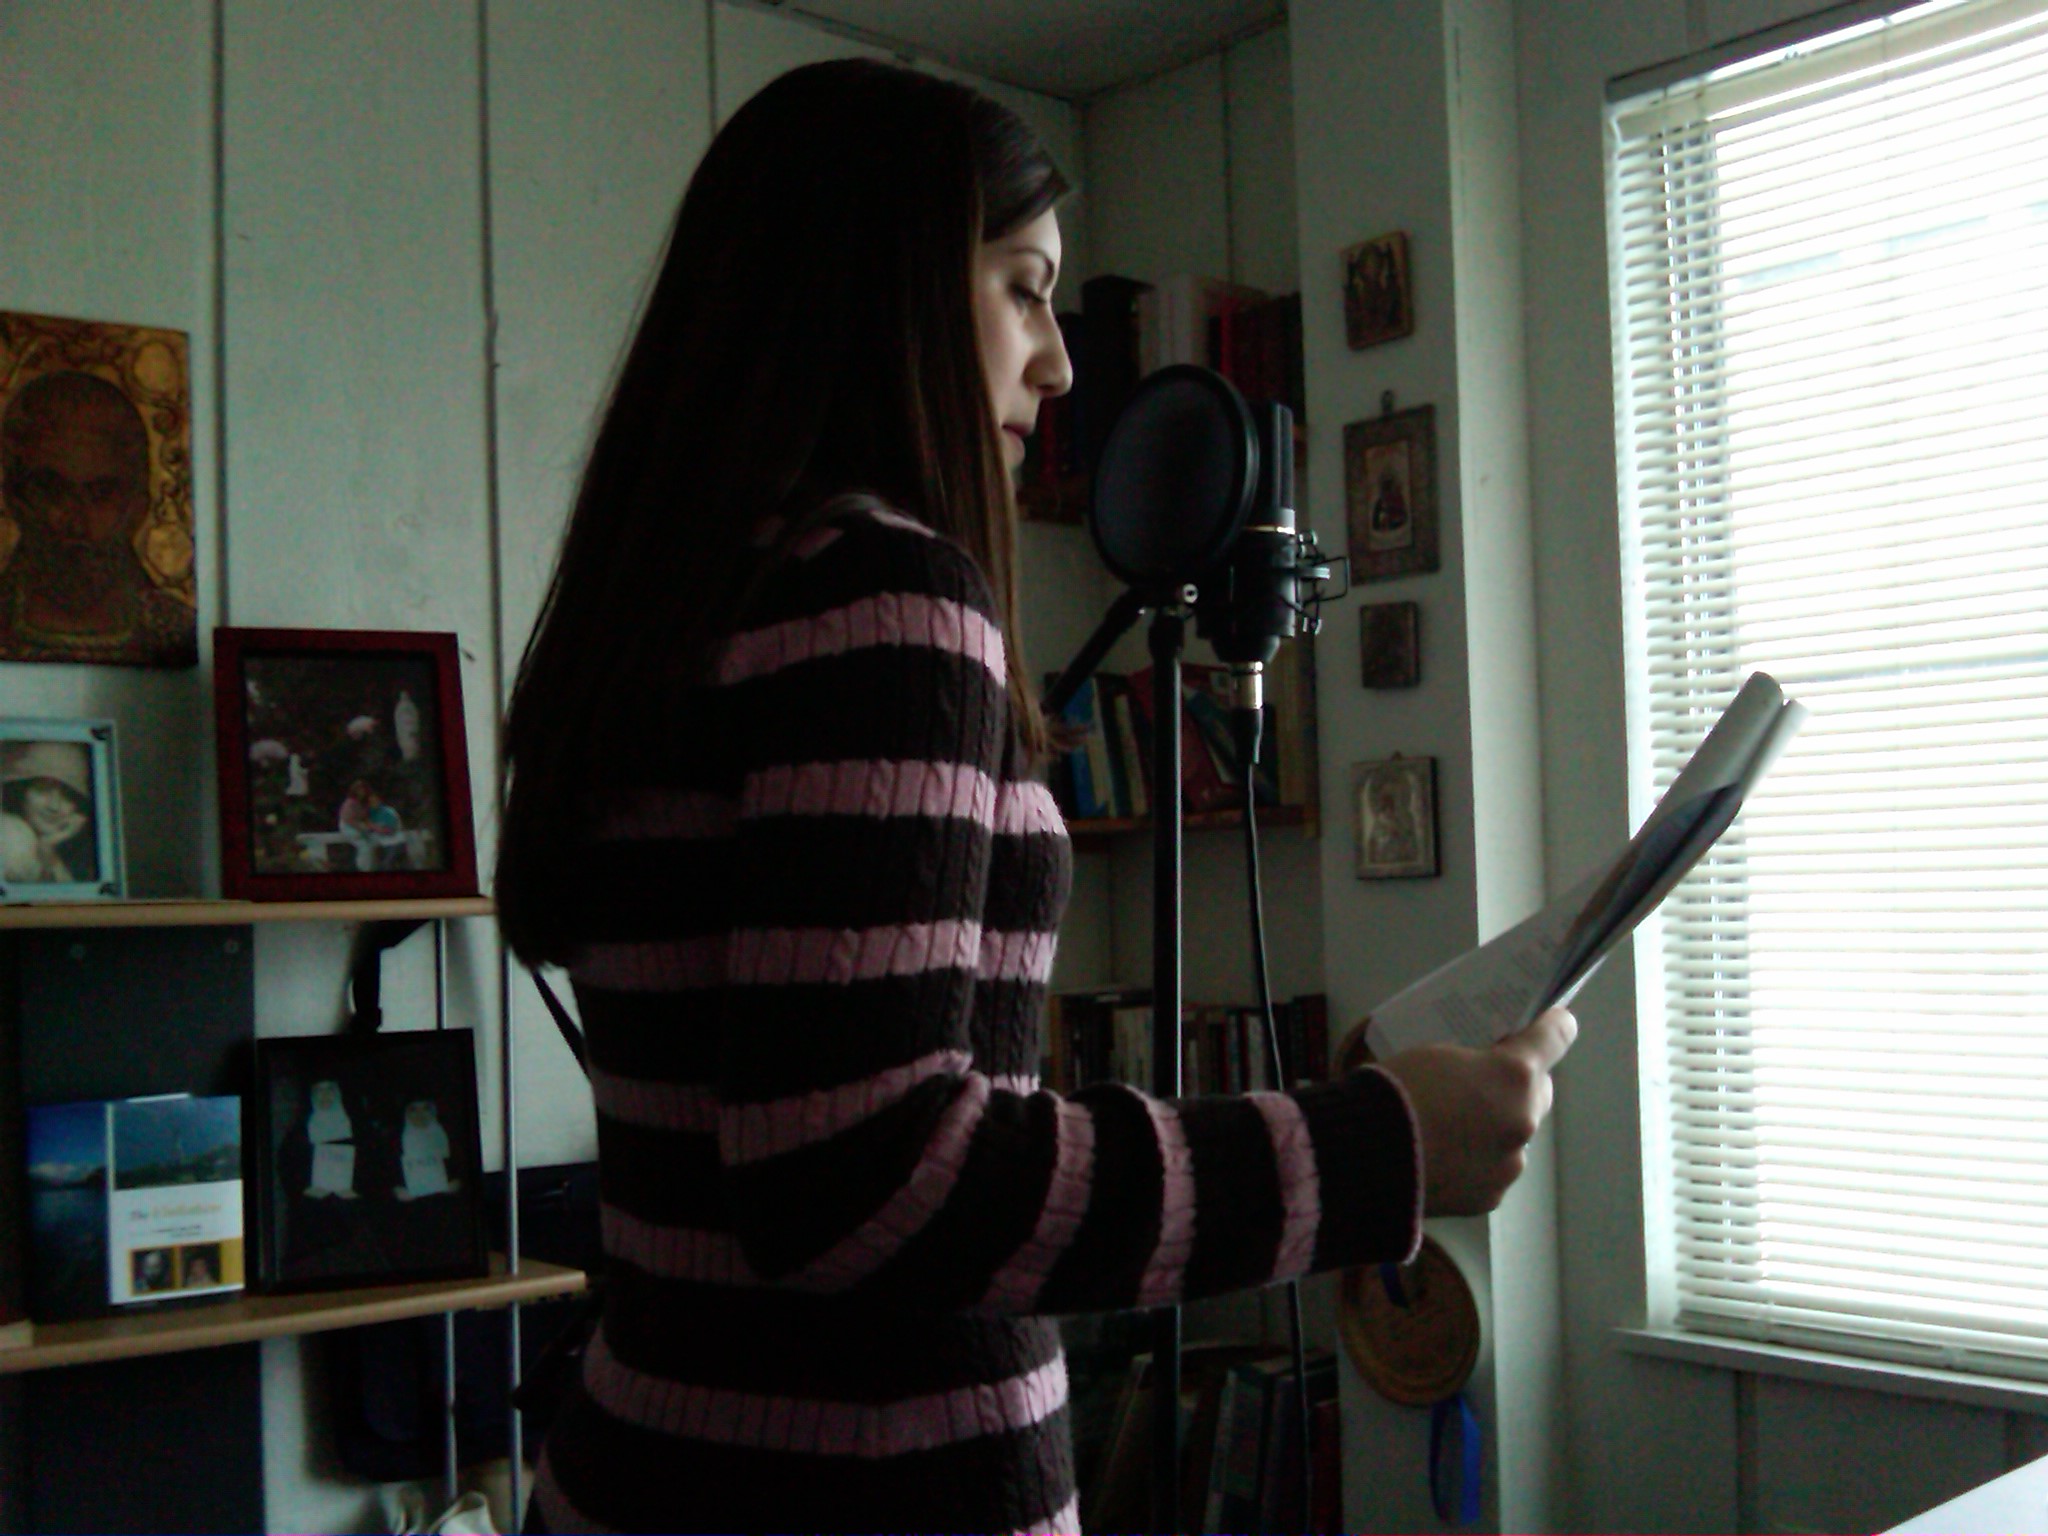 Actress Mary Rose Maher doing Voice Over work.